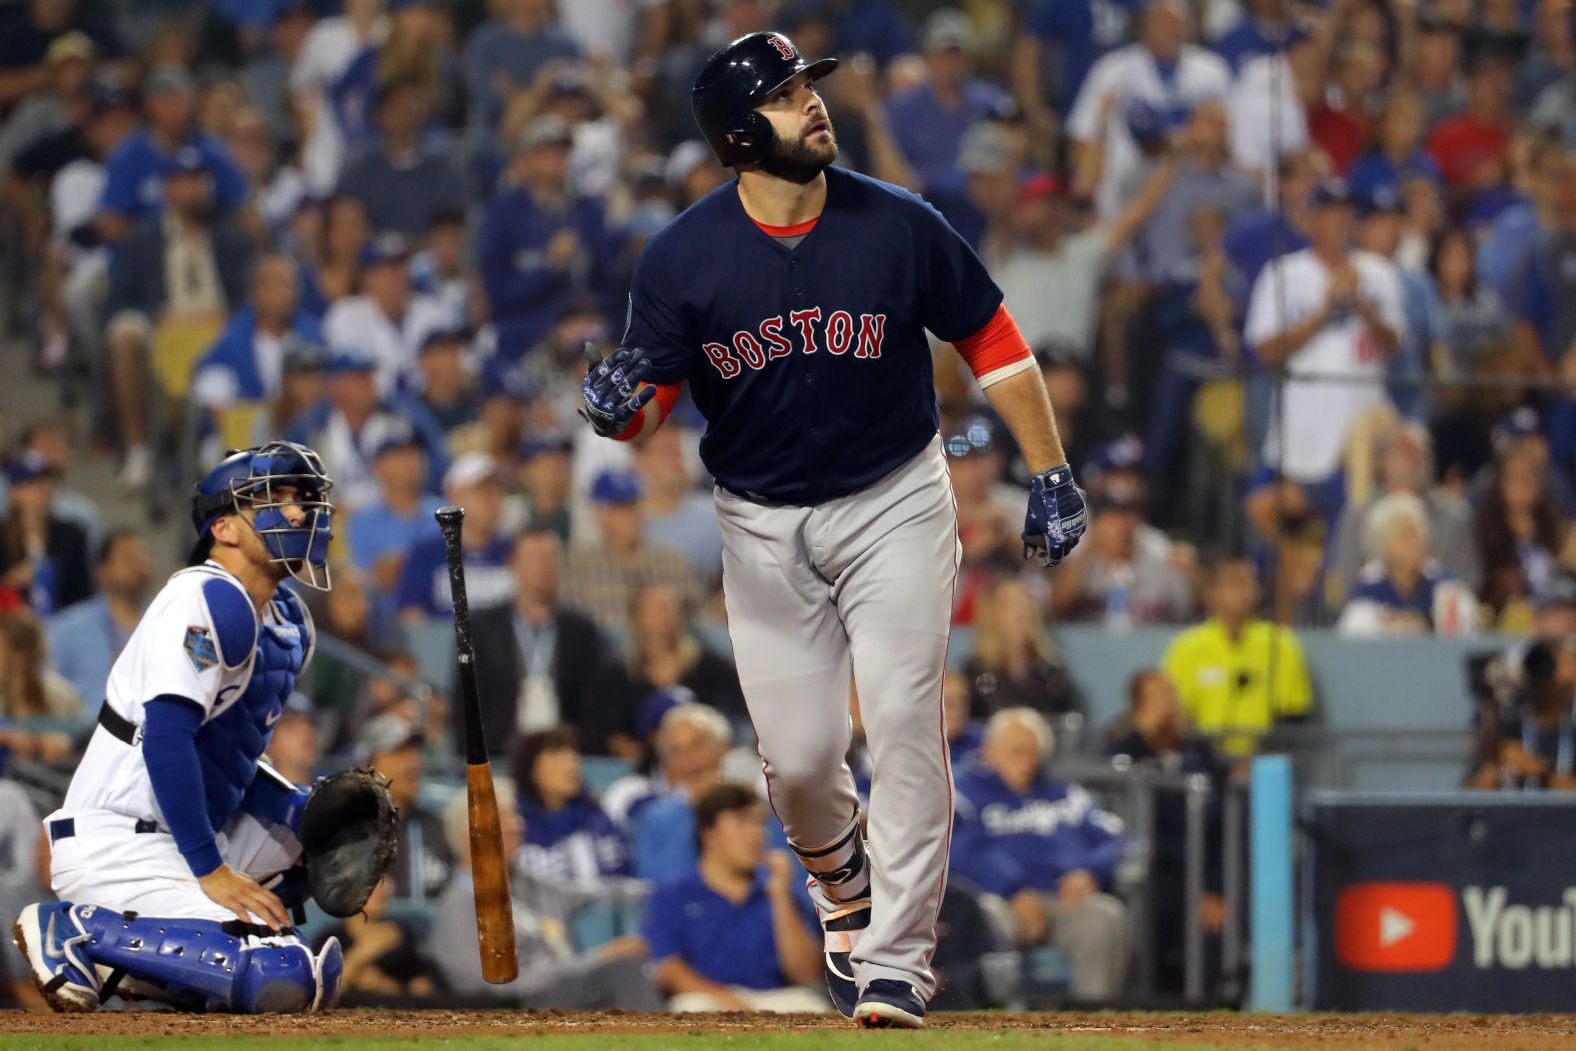 Mitch Moreland of the Red Sox hits a three-run home run in the seventh inning during Game 4. The Red Sox won the game 9-6 to take a 3-1 series lead.